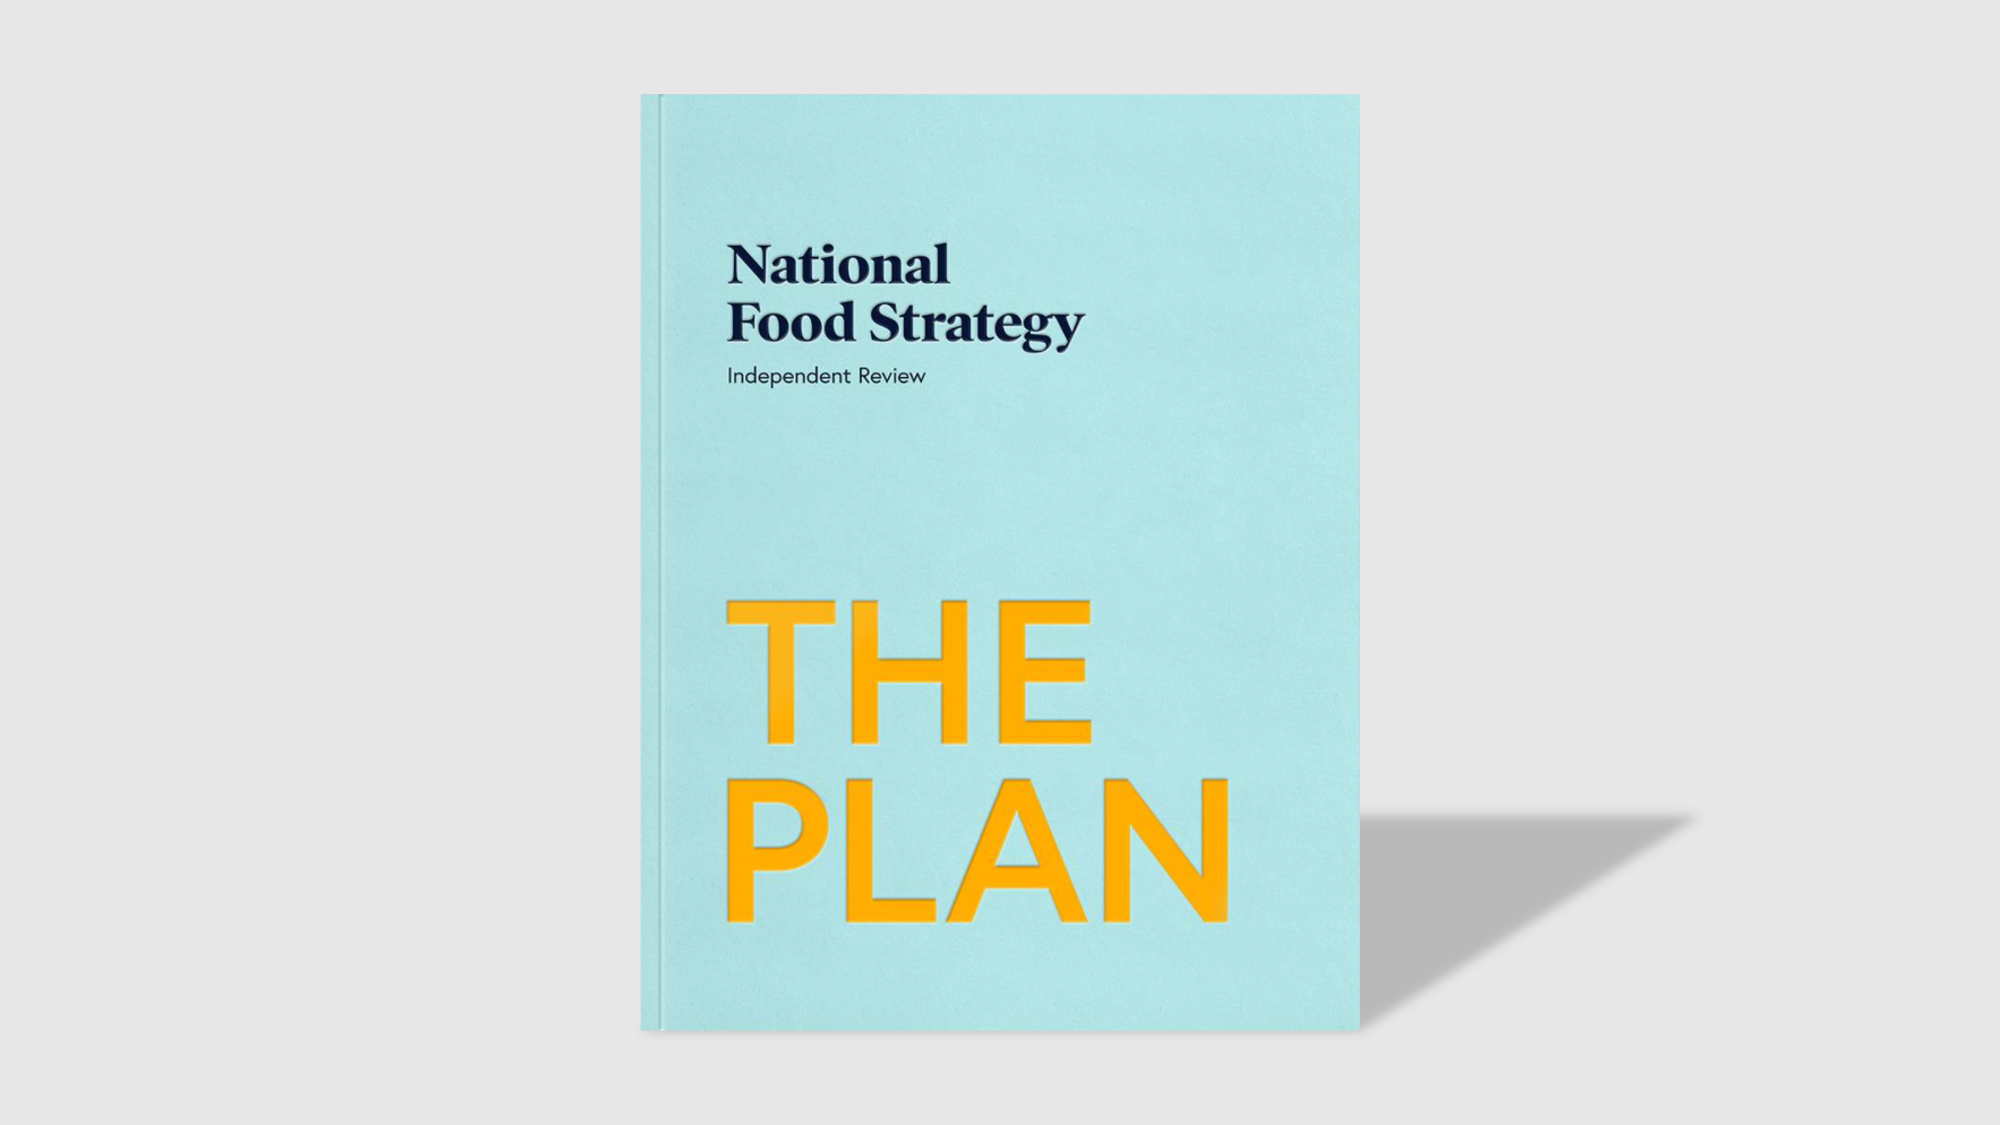 www.nationalfoodstrategy.org